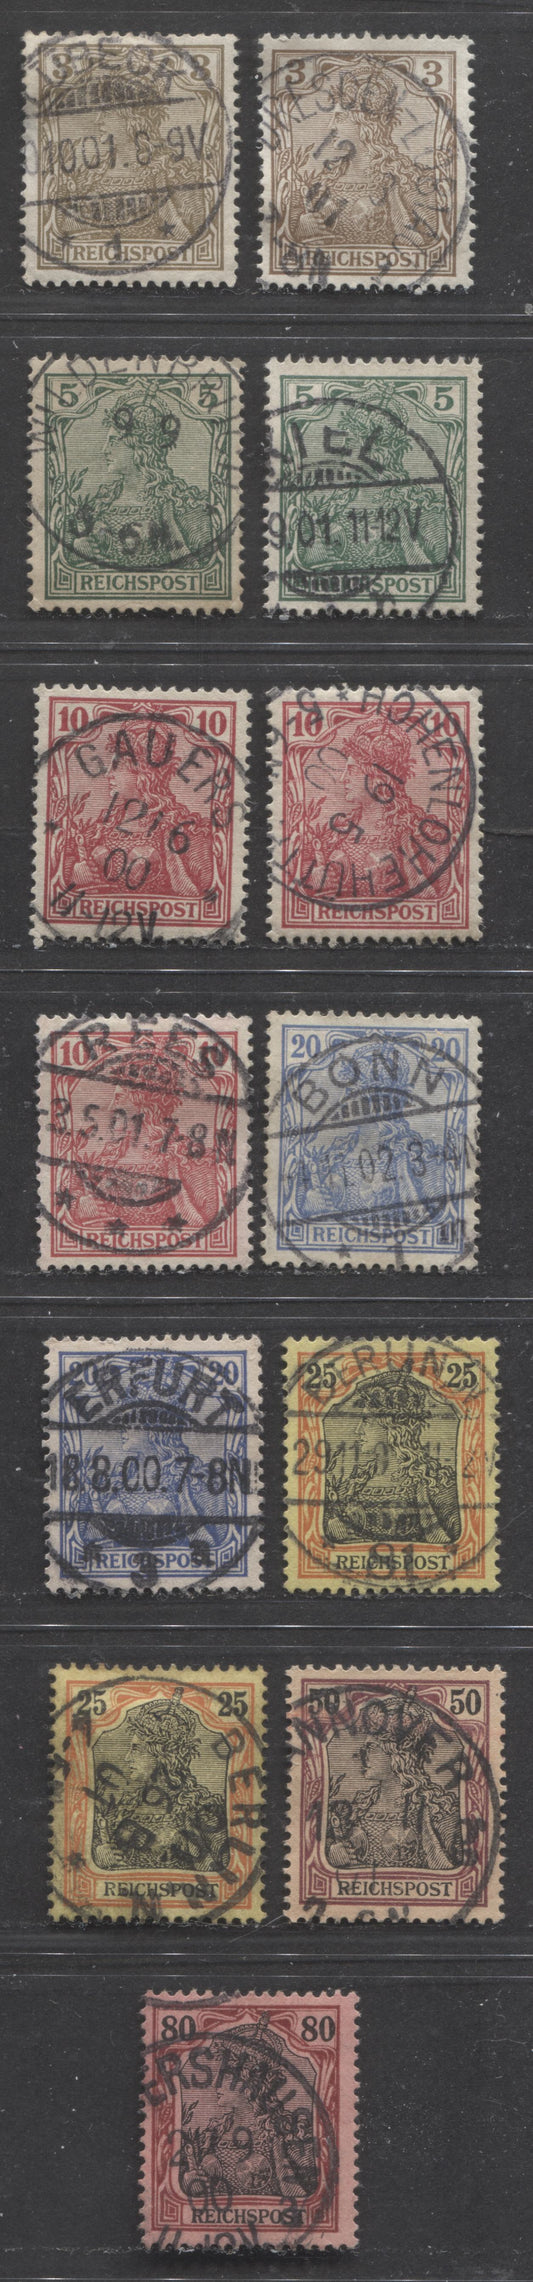 Lot 432 Germany SC#57/61 1900 Reichpost Germania Issue, All With SON Town Cancels, 13 VF Used Singles, Click on Listing to See ALL Pictures, 2022 Scott Classic Cat. $19.4